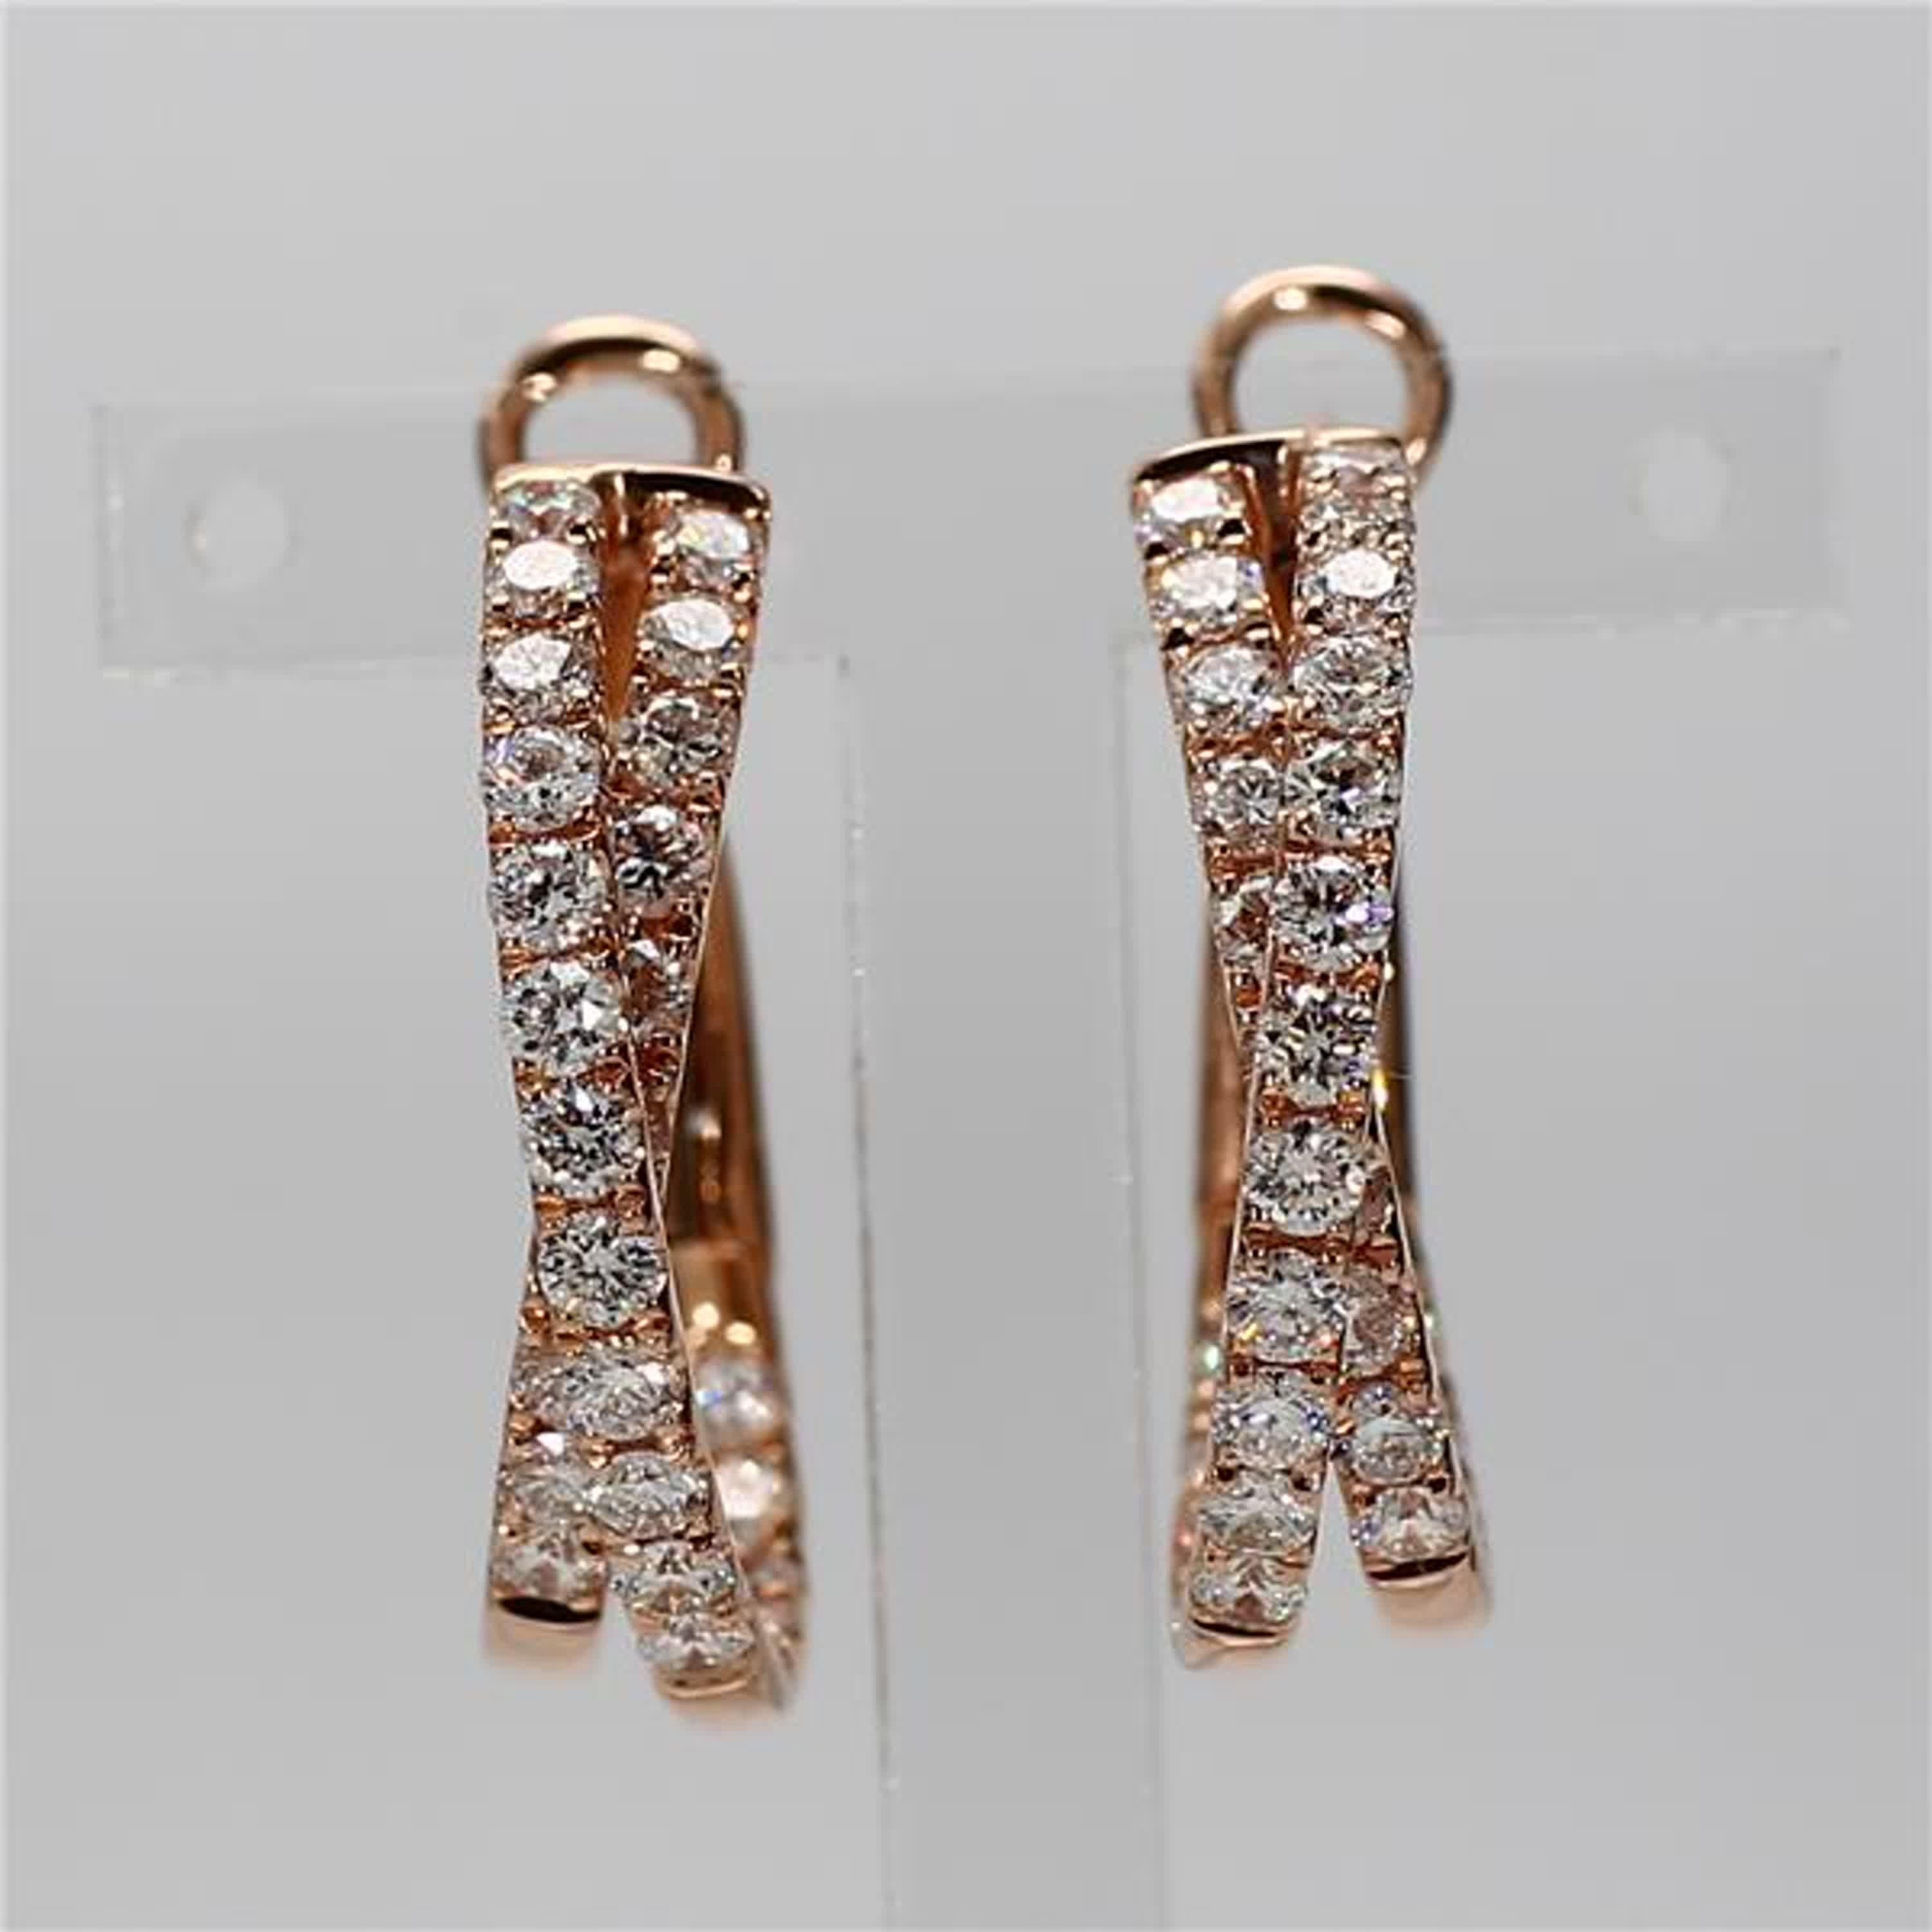 RareGemWorld's classic diamond earrings. Mounted in a beautiful 18K Rose Gold setting with natural round cut white diamonds. These earrings are guaranteed to impress and enhance your personal collection!

Total Weight: 2.62cts

Length X Width: 23.3